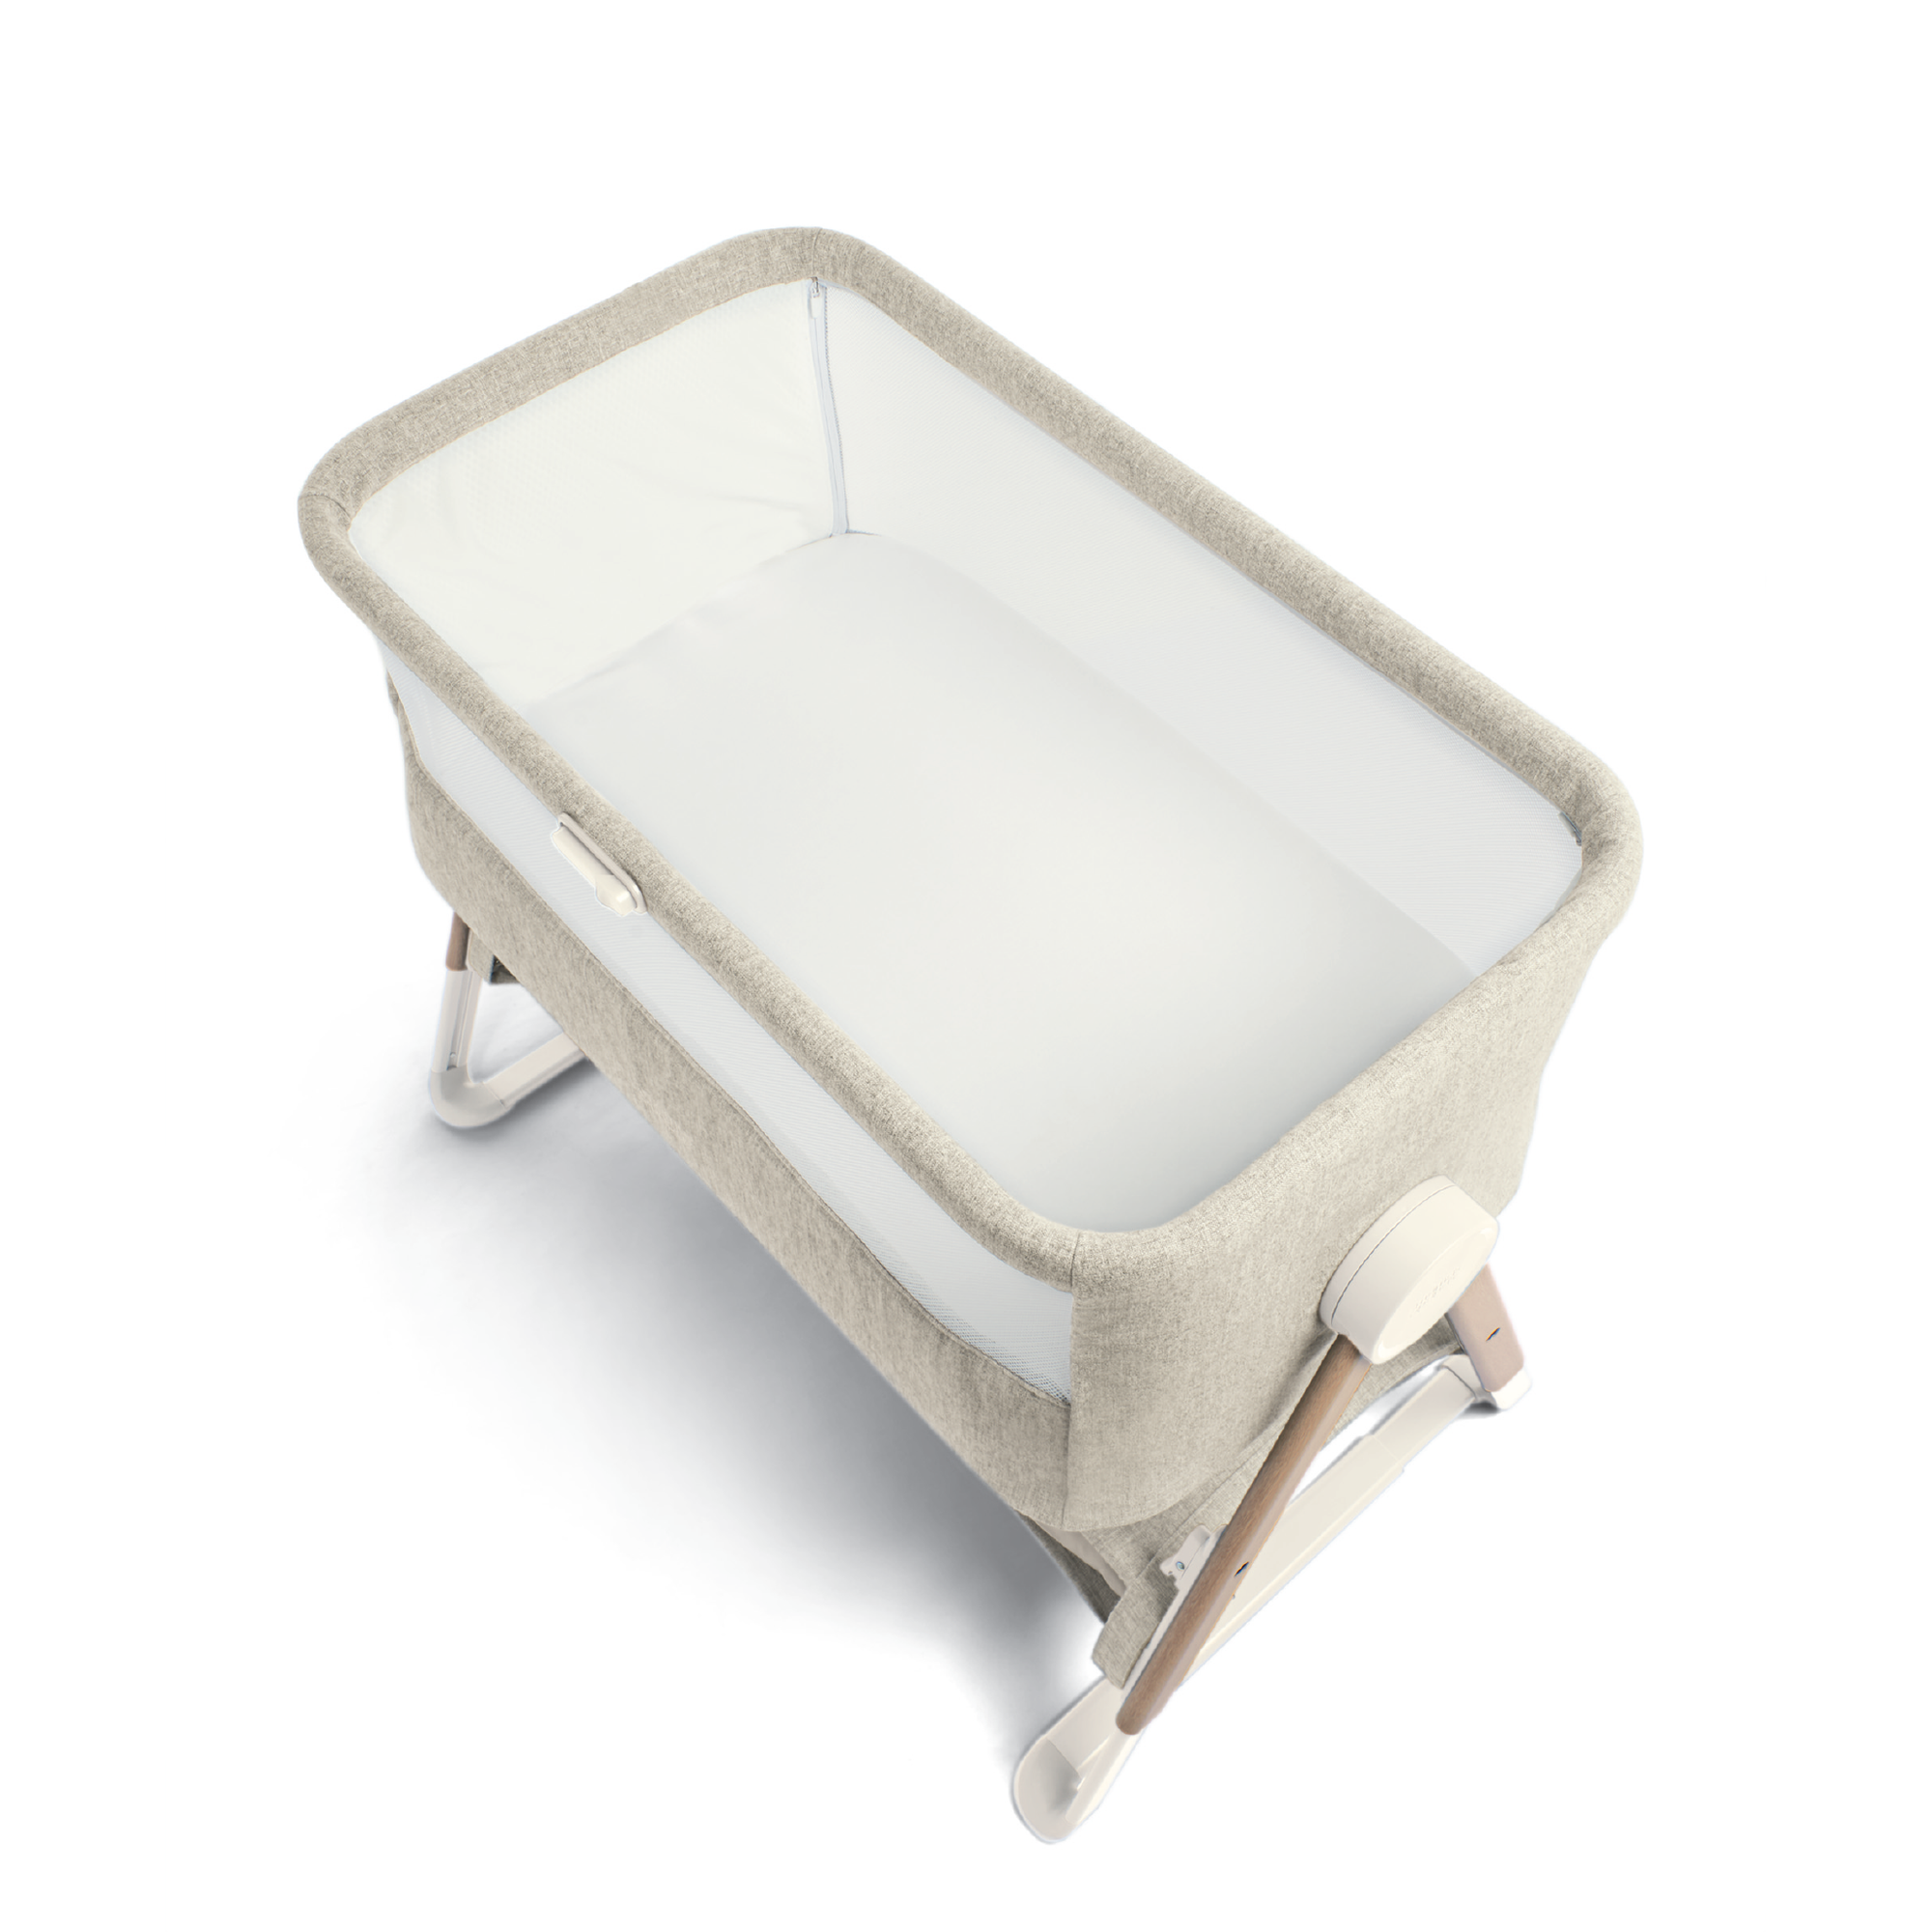 Mamas & Papas Lua Bedside Crib - Beige (Pre order for delivery Feb '24)